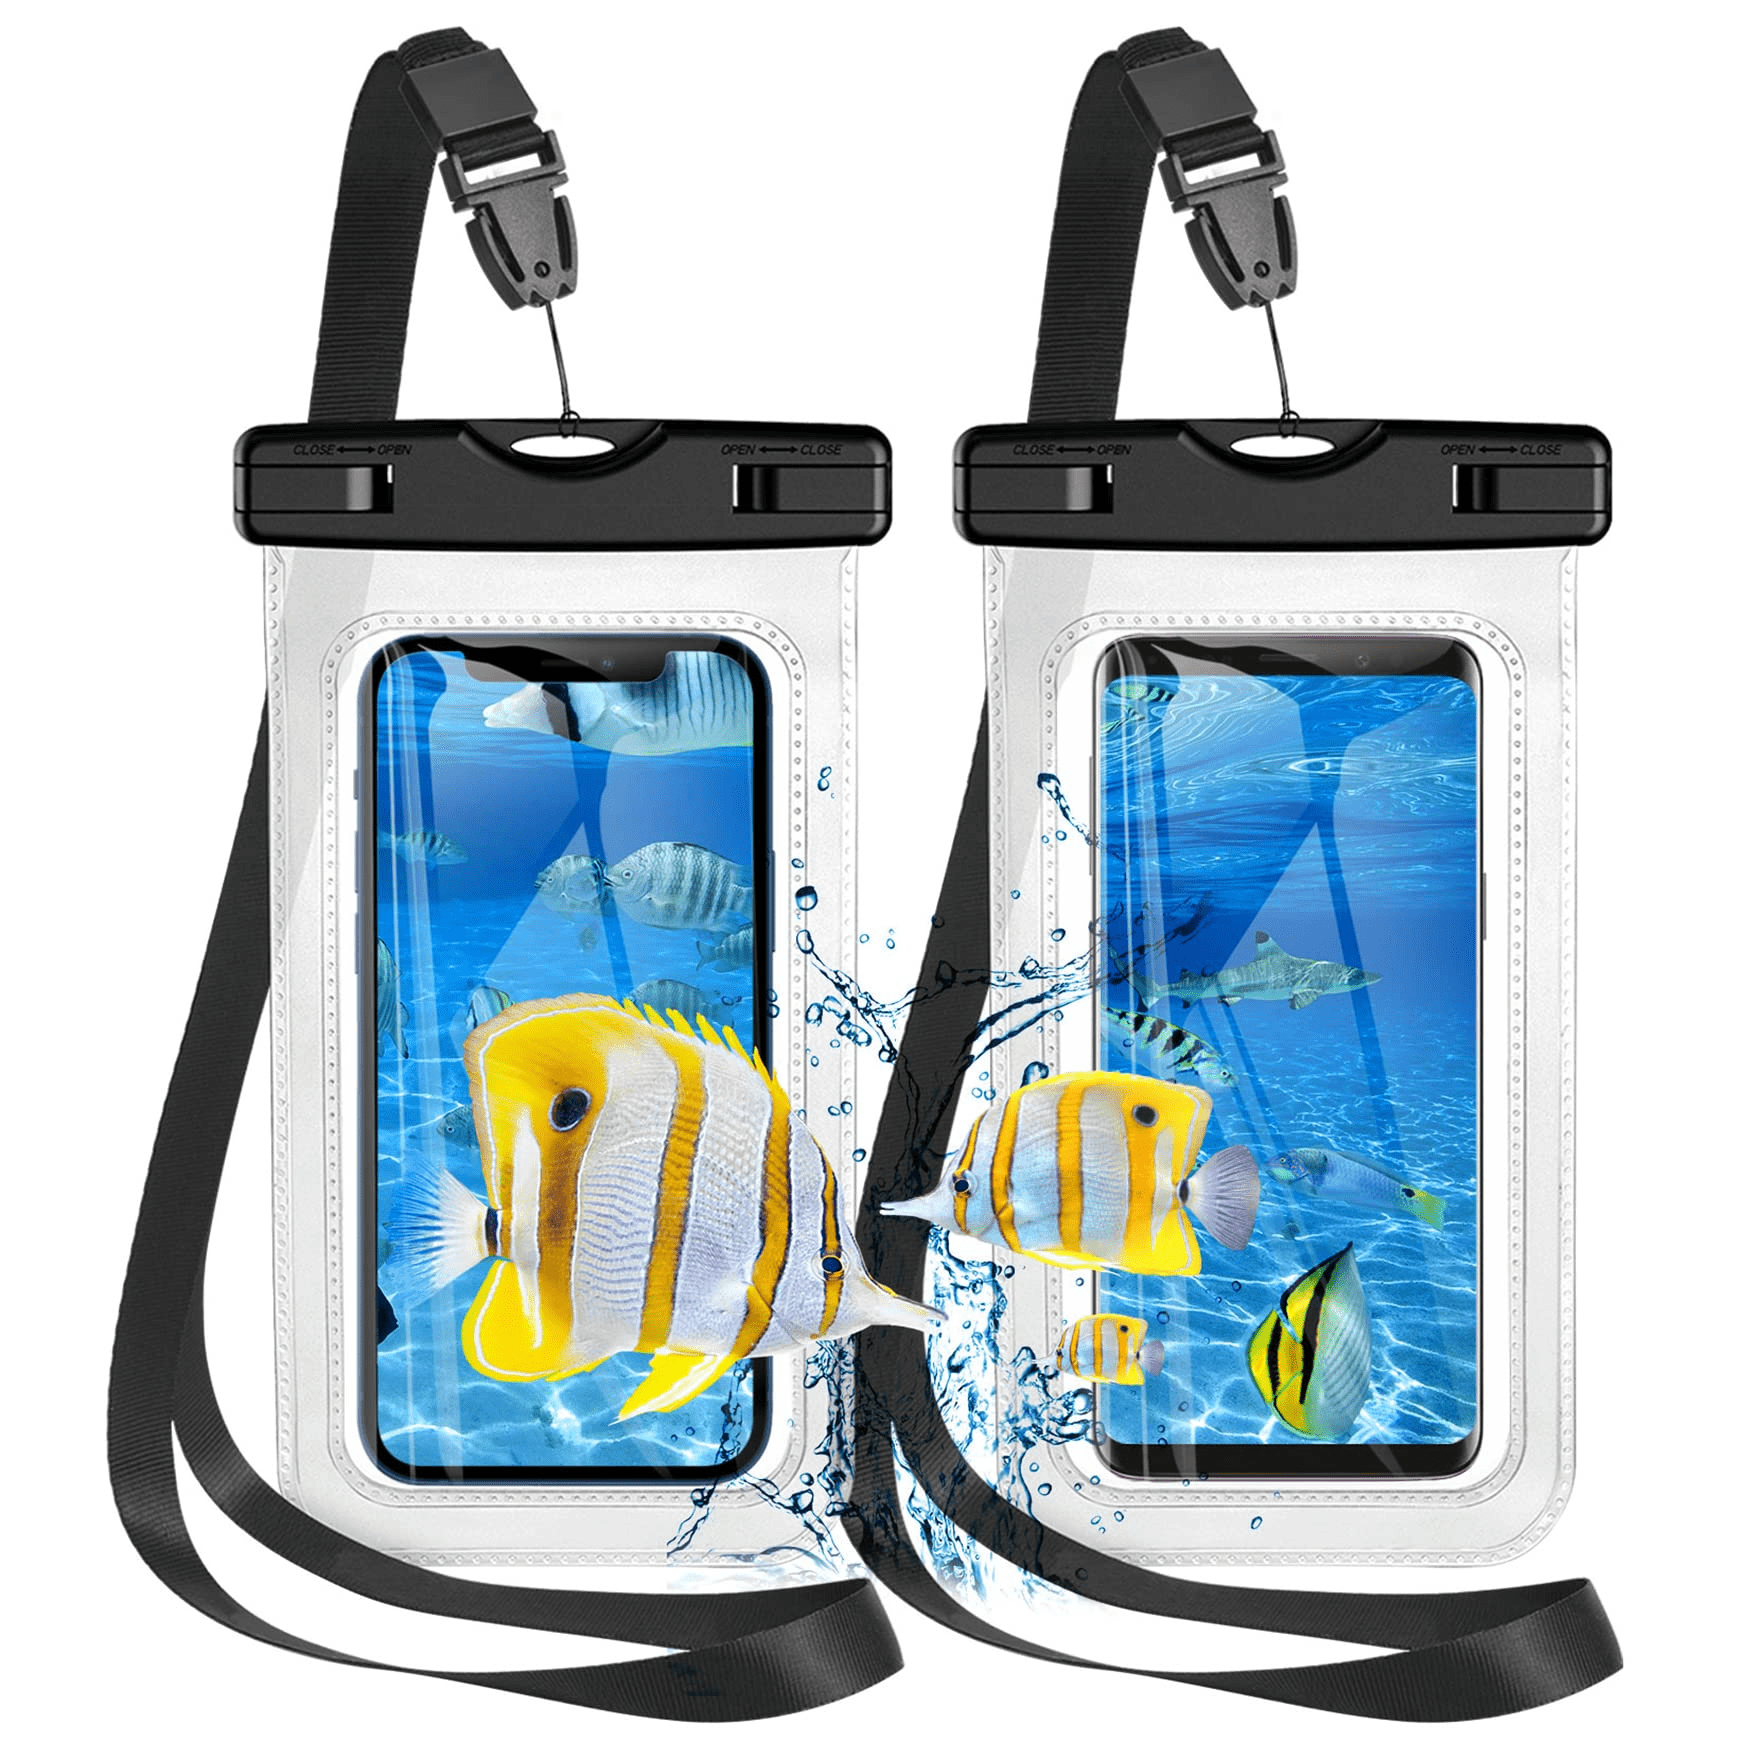 IPX8 Cellphone Dry Bag Universal Waterproof Case,Waterproof Phone Pouch Compatible for iPhone 13 12 11 Pro Max XS Max XR X 8 7 Samsung Galaxy s10/s9 Google Pixel 2 HTC Up to 7.0 2 Pack 